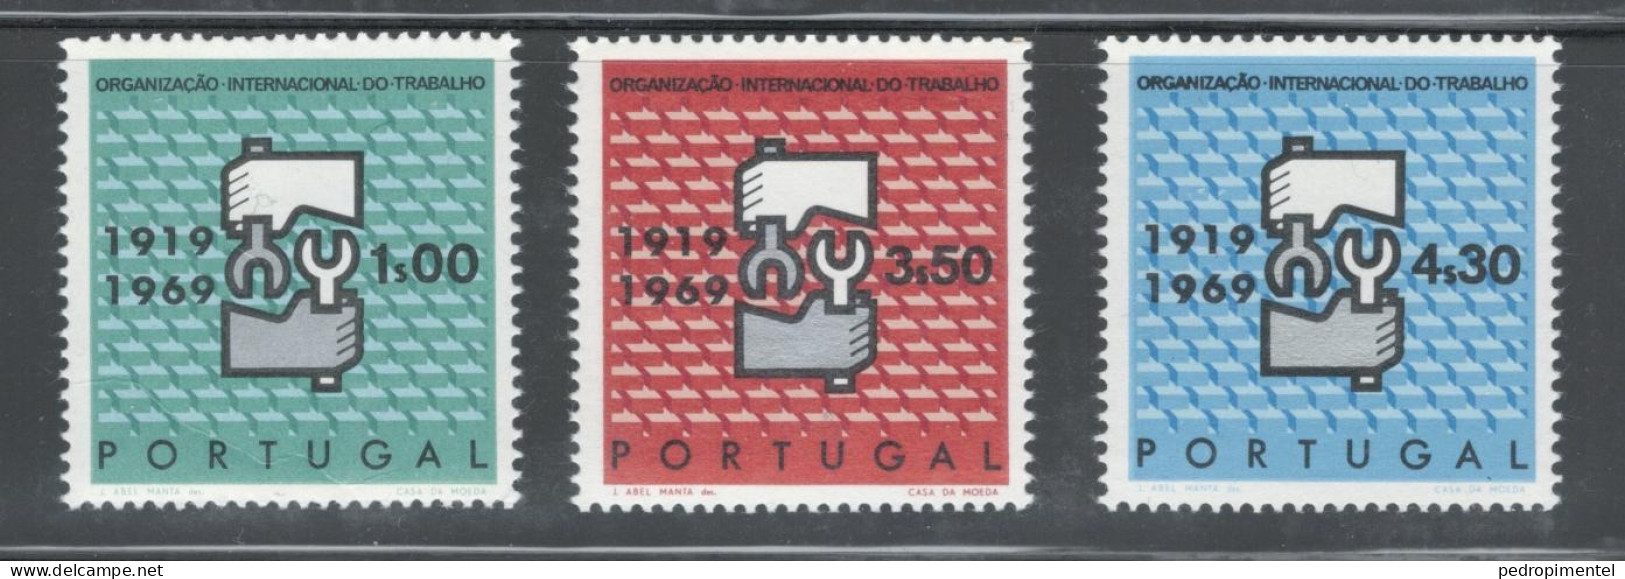 Portugal Stamps 1969 "OIT" Condition MNH #1047-1049 - Nuovi